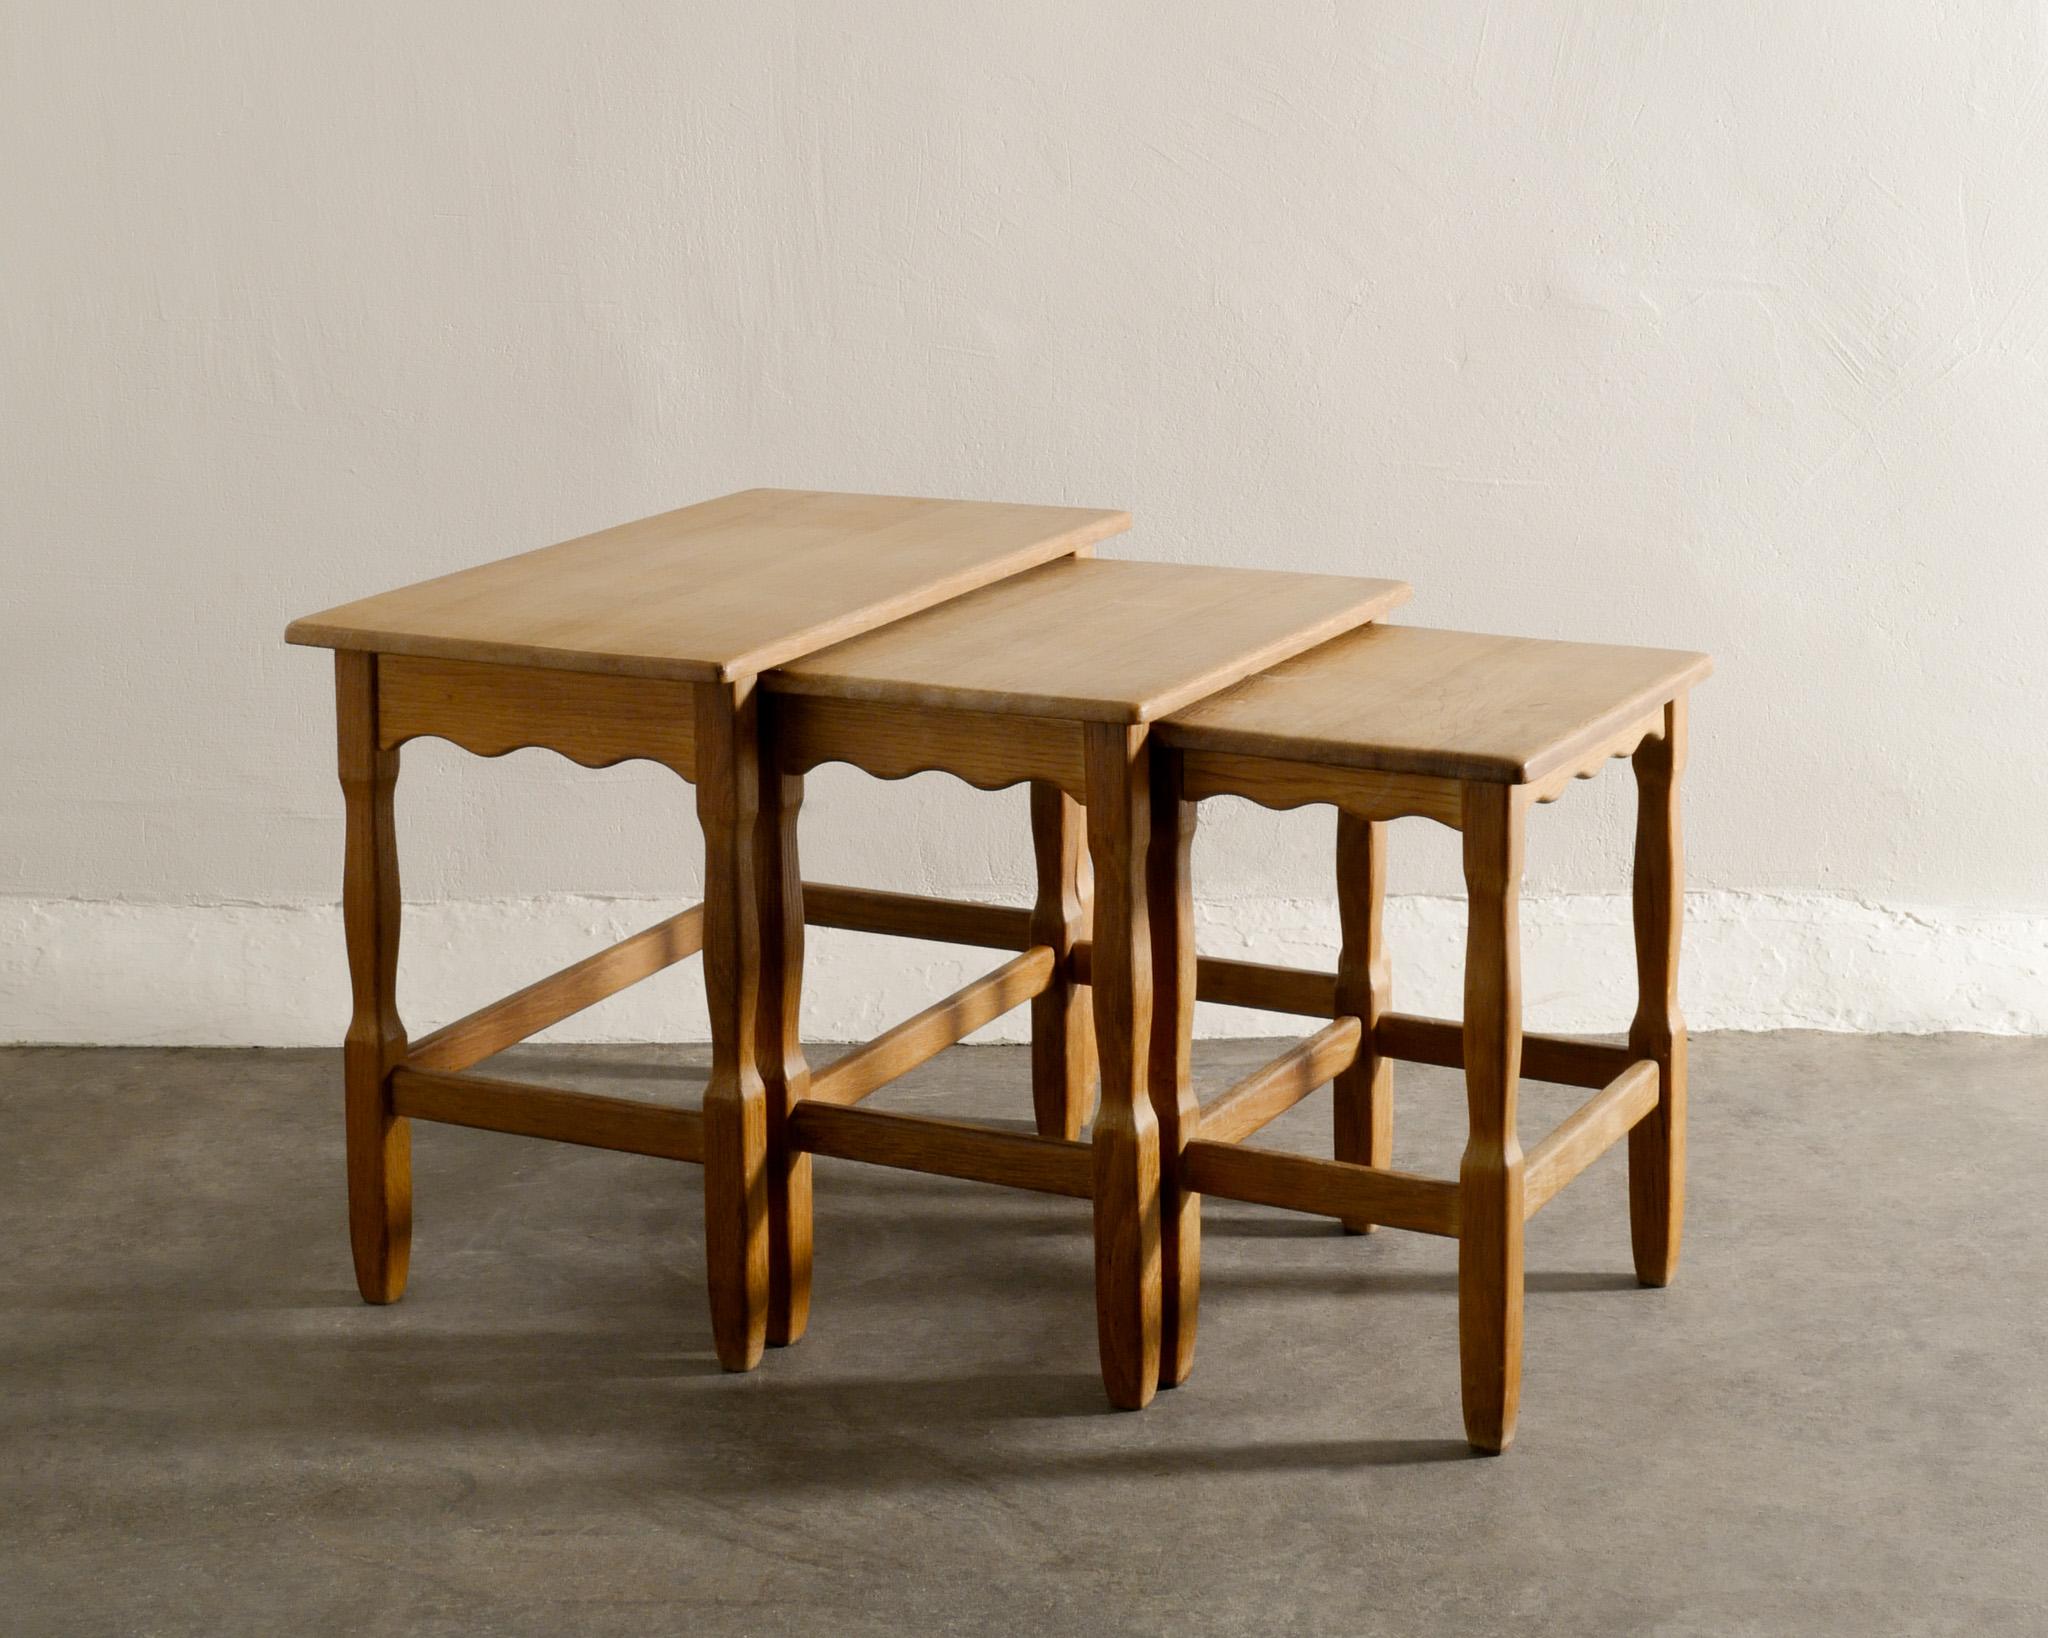 Rare set of mid century side stacking nesting tables in solid stained oak designed by Henning Kjærnulf produced in Denmark with some Jean Royère vibes. In good vintage condition with light patina from age and use. All tables are stable.